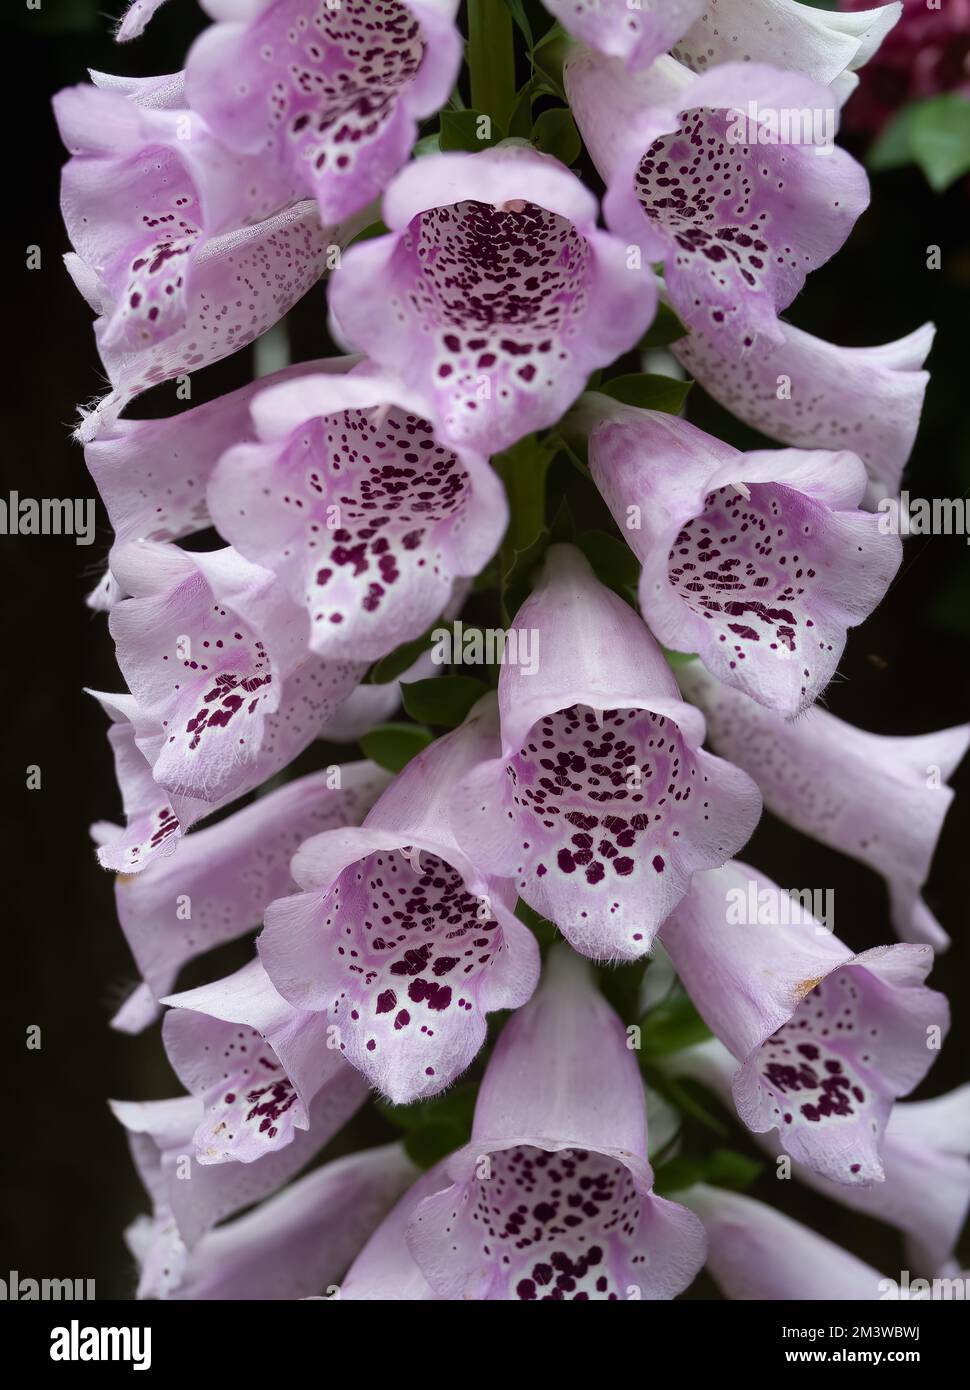 Close up of multple pink foxglove flowers with purple spots on the inside of the flower. Photographed with a shallow depth of field. Stock Photo